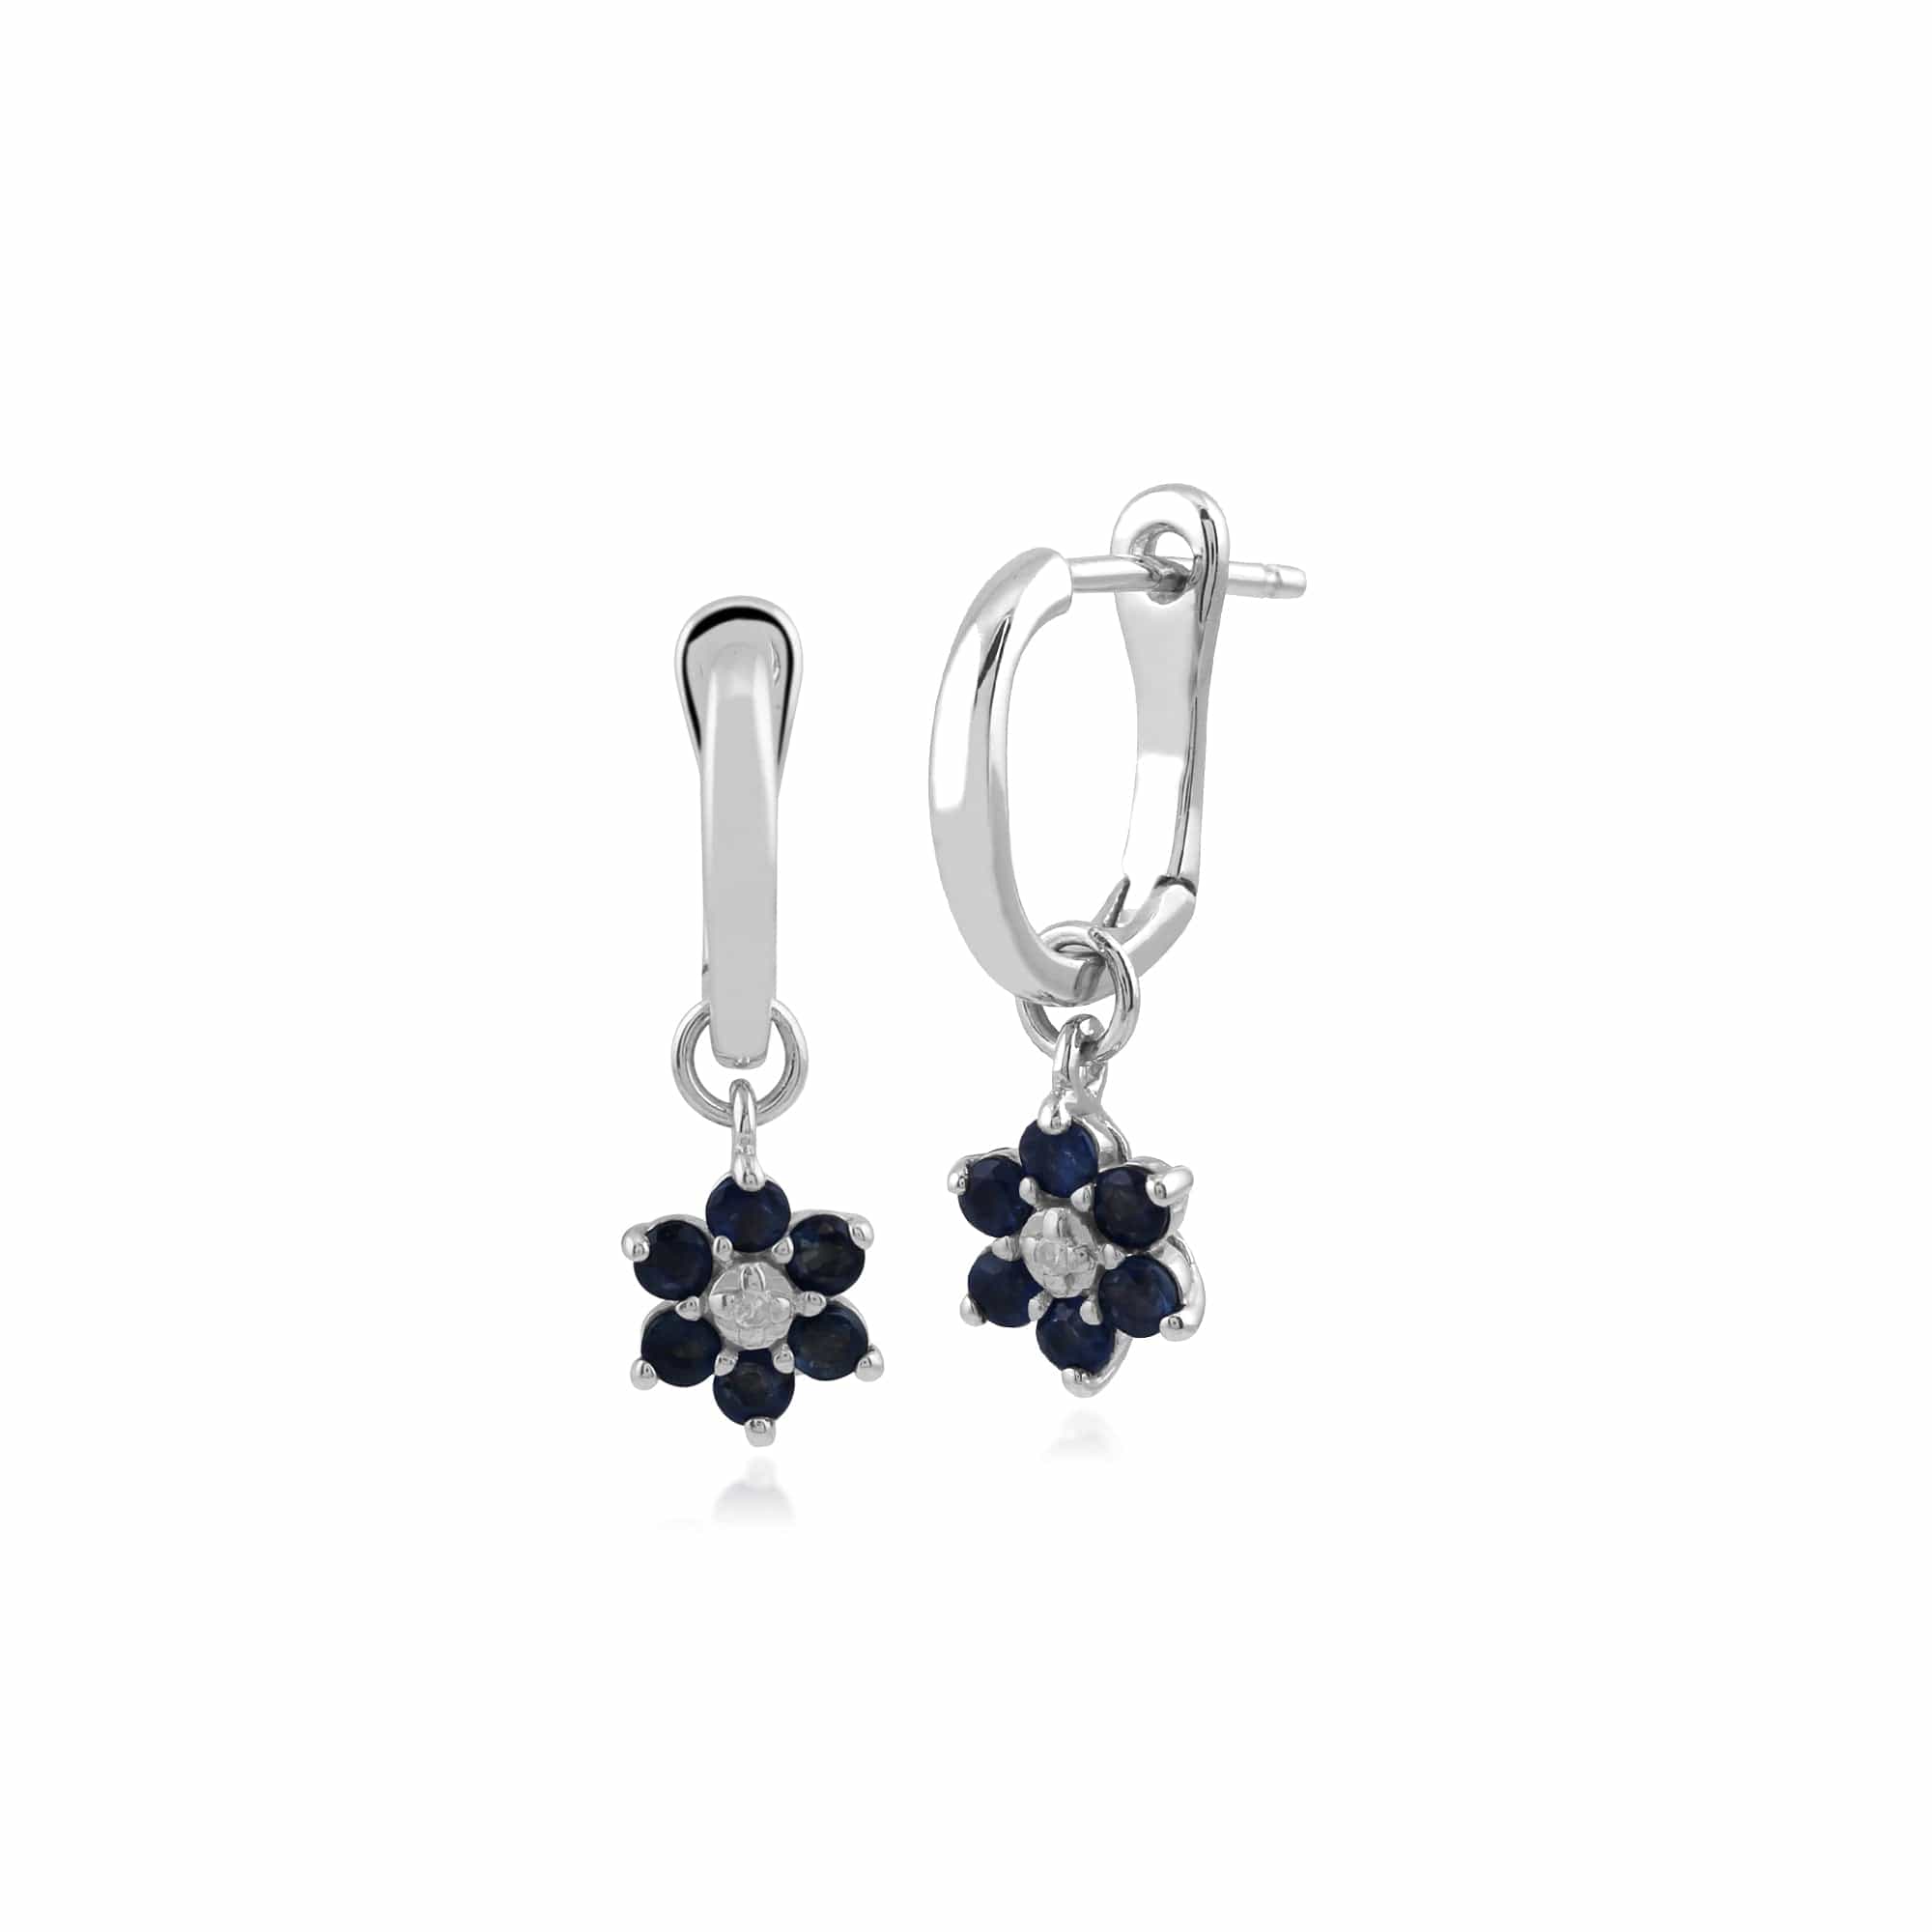 Floral Round Sapphire & Diamond Flower Drop Earrings & Ring Set in 9ct White Gold - Gemondo